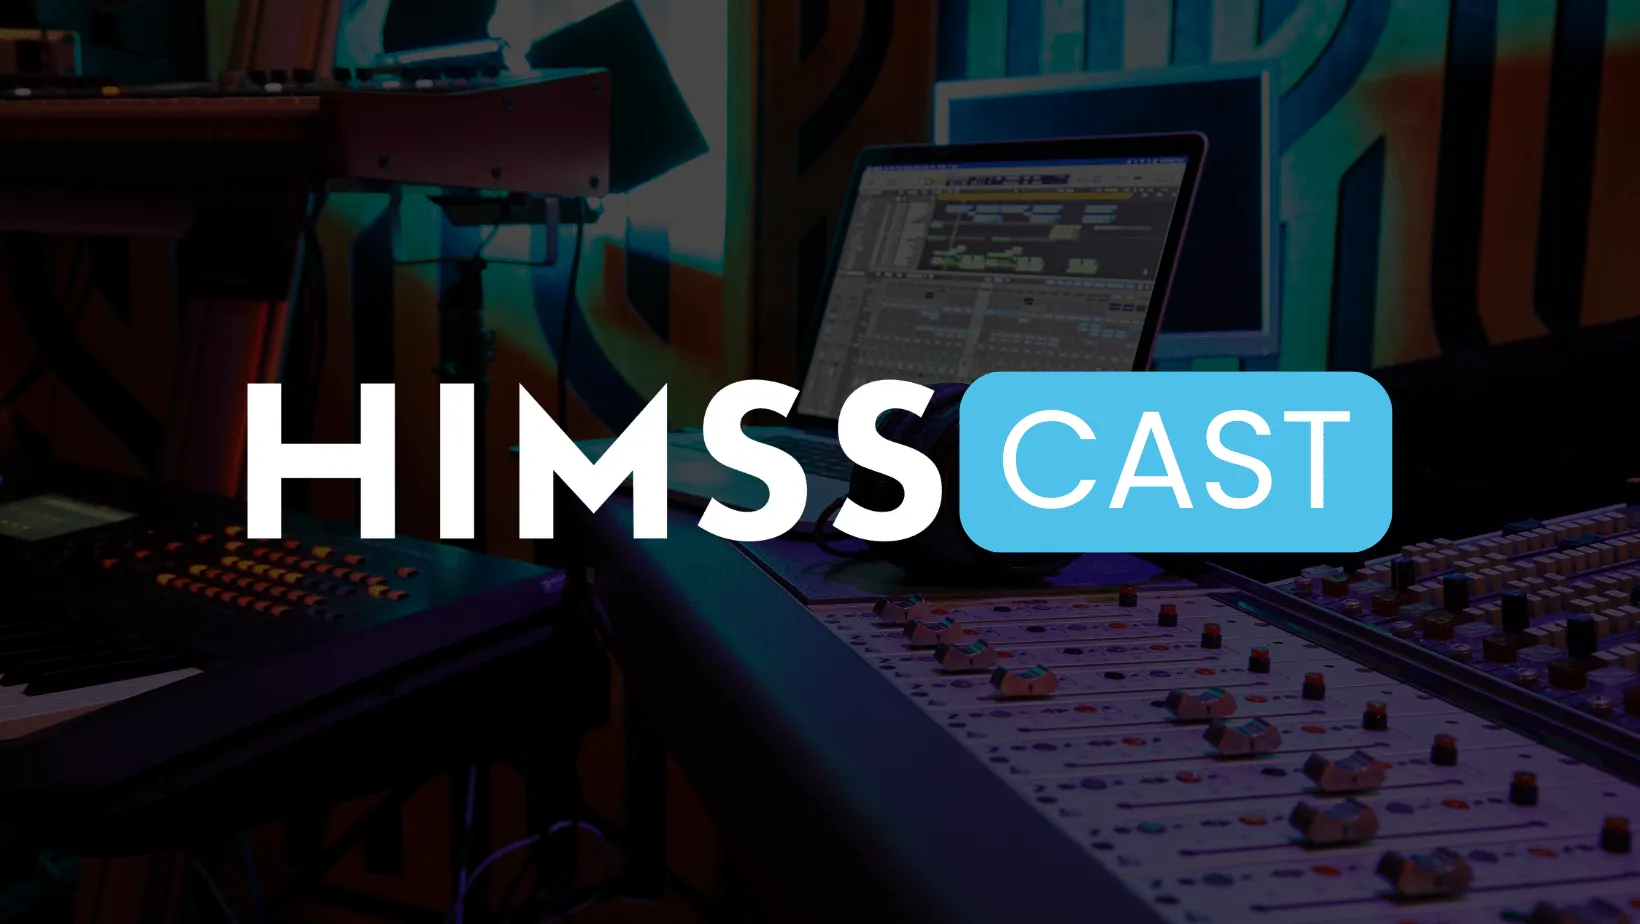 White and blue HIMSS podcast logo over a dark background.